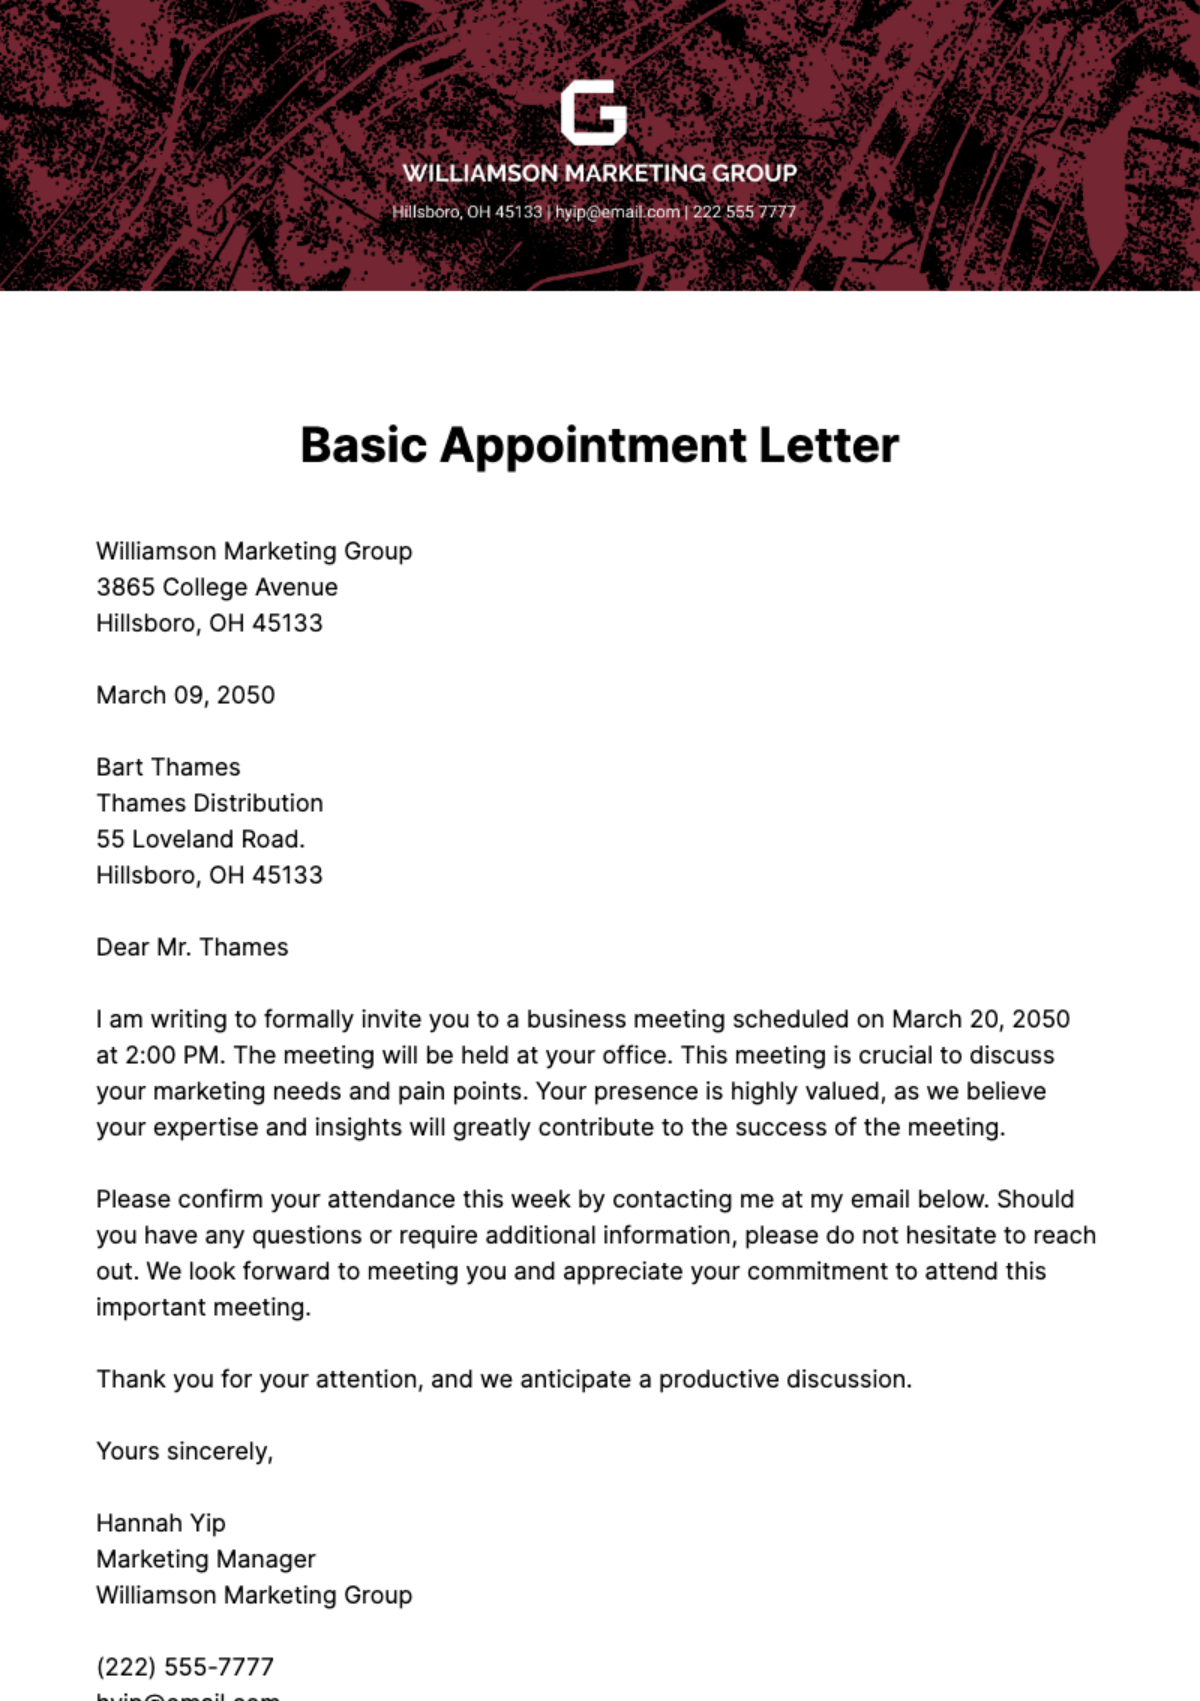 Basic Appointment Letter   Template